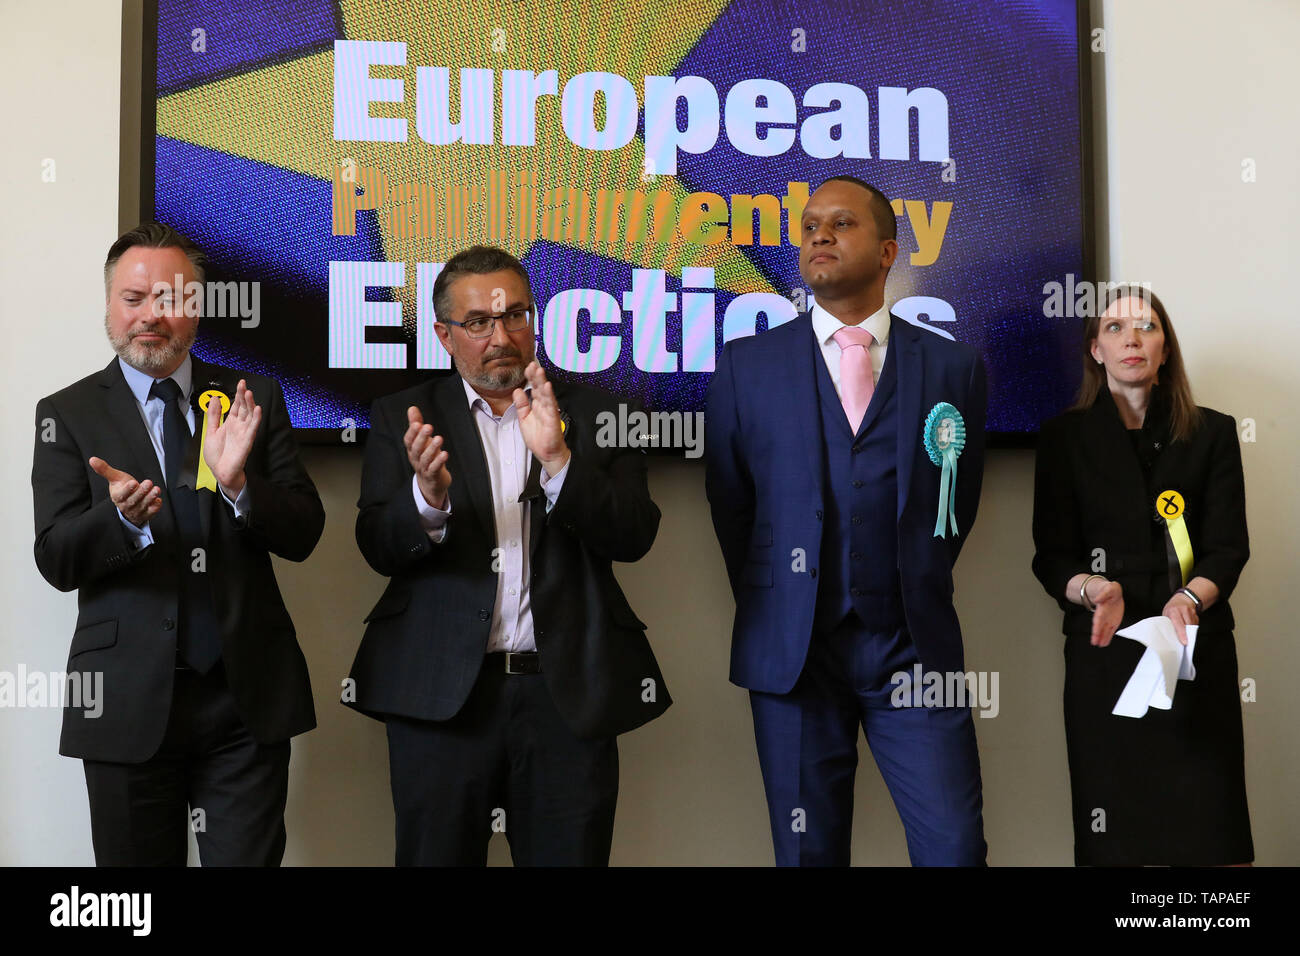 Newly elected MEPs L-r Alyn Smith, Christian Allard, Louis Stedman-Bryce and Aileen McLeod at the European Parliamentary elections count at the City Chambers in Edinburgh. Stock Photo